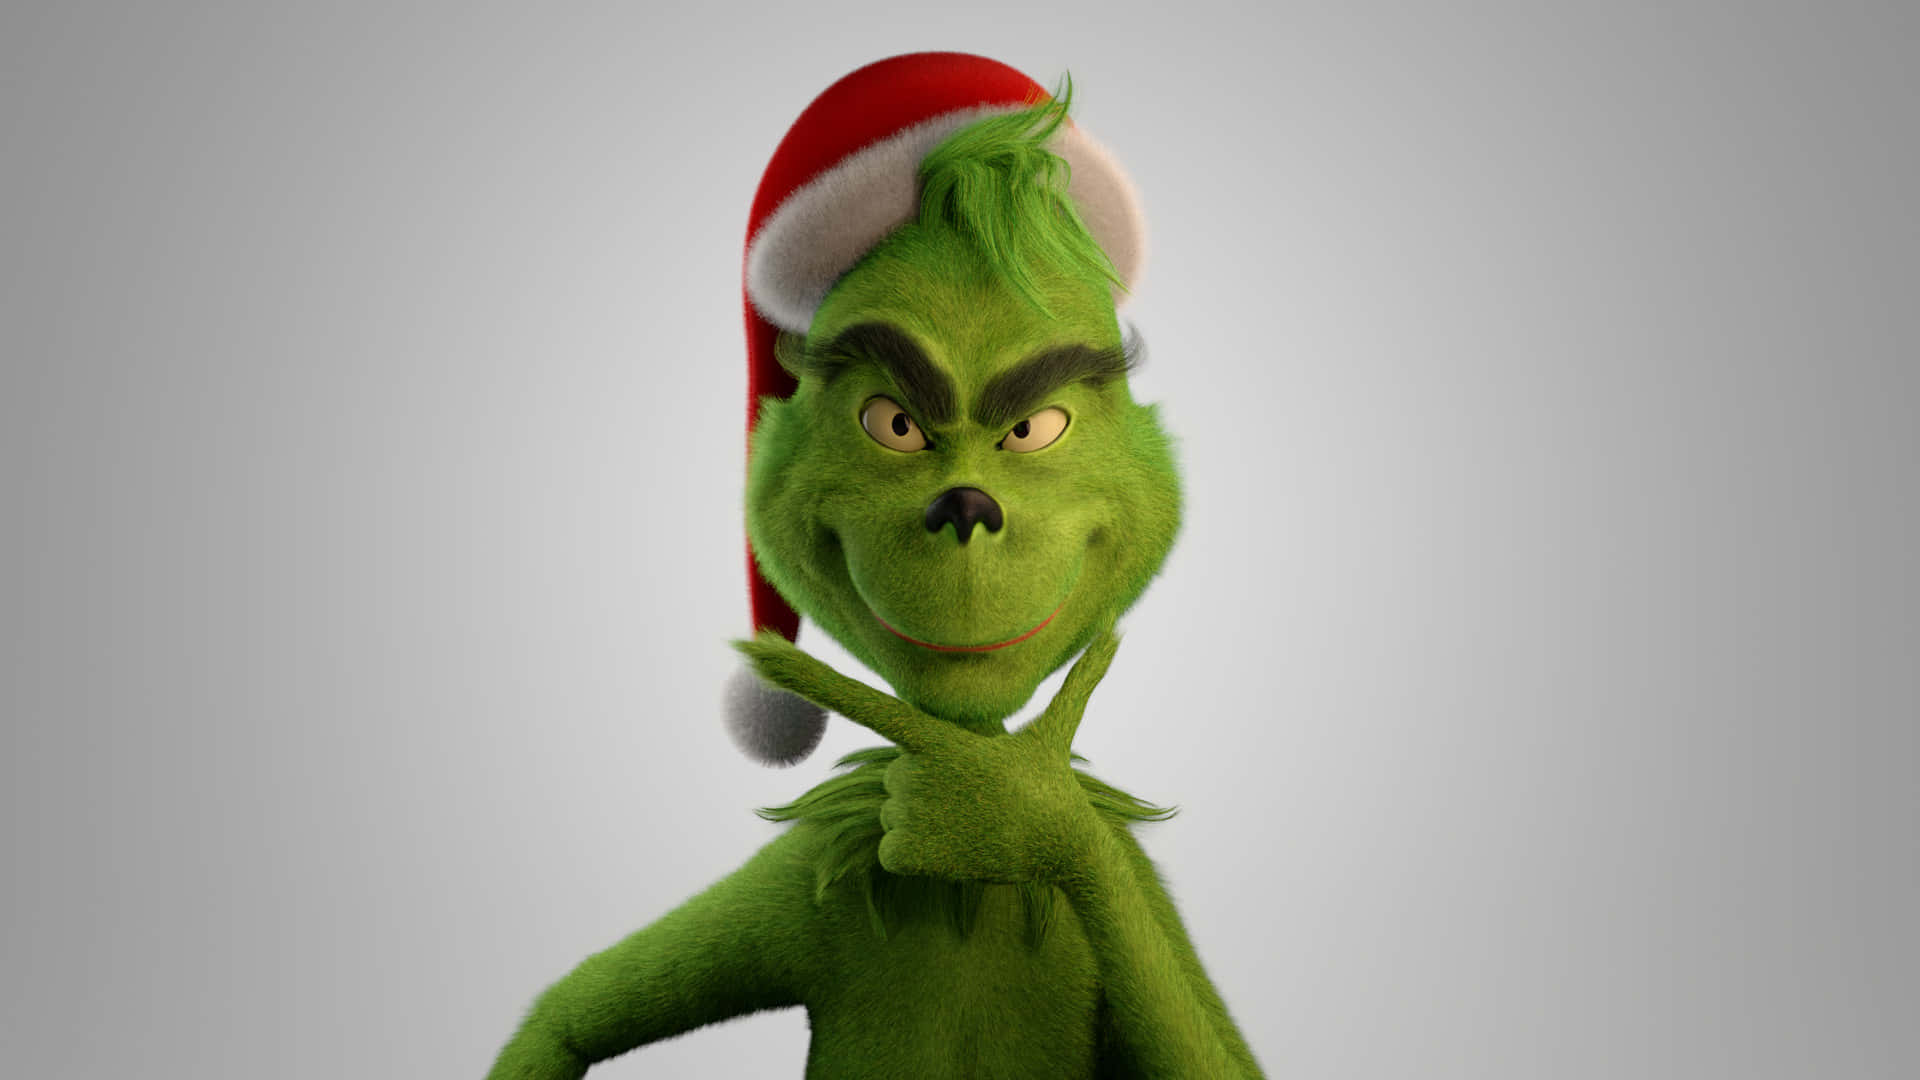 The Grinch Lurks in the North Pole